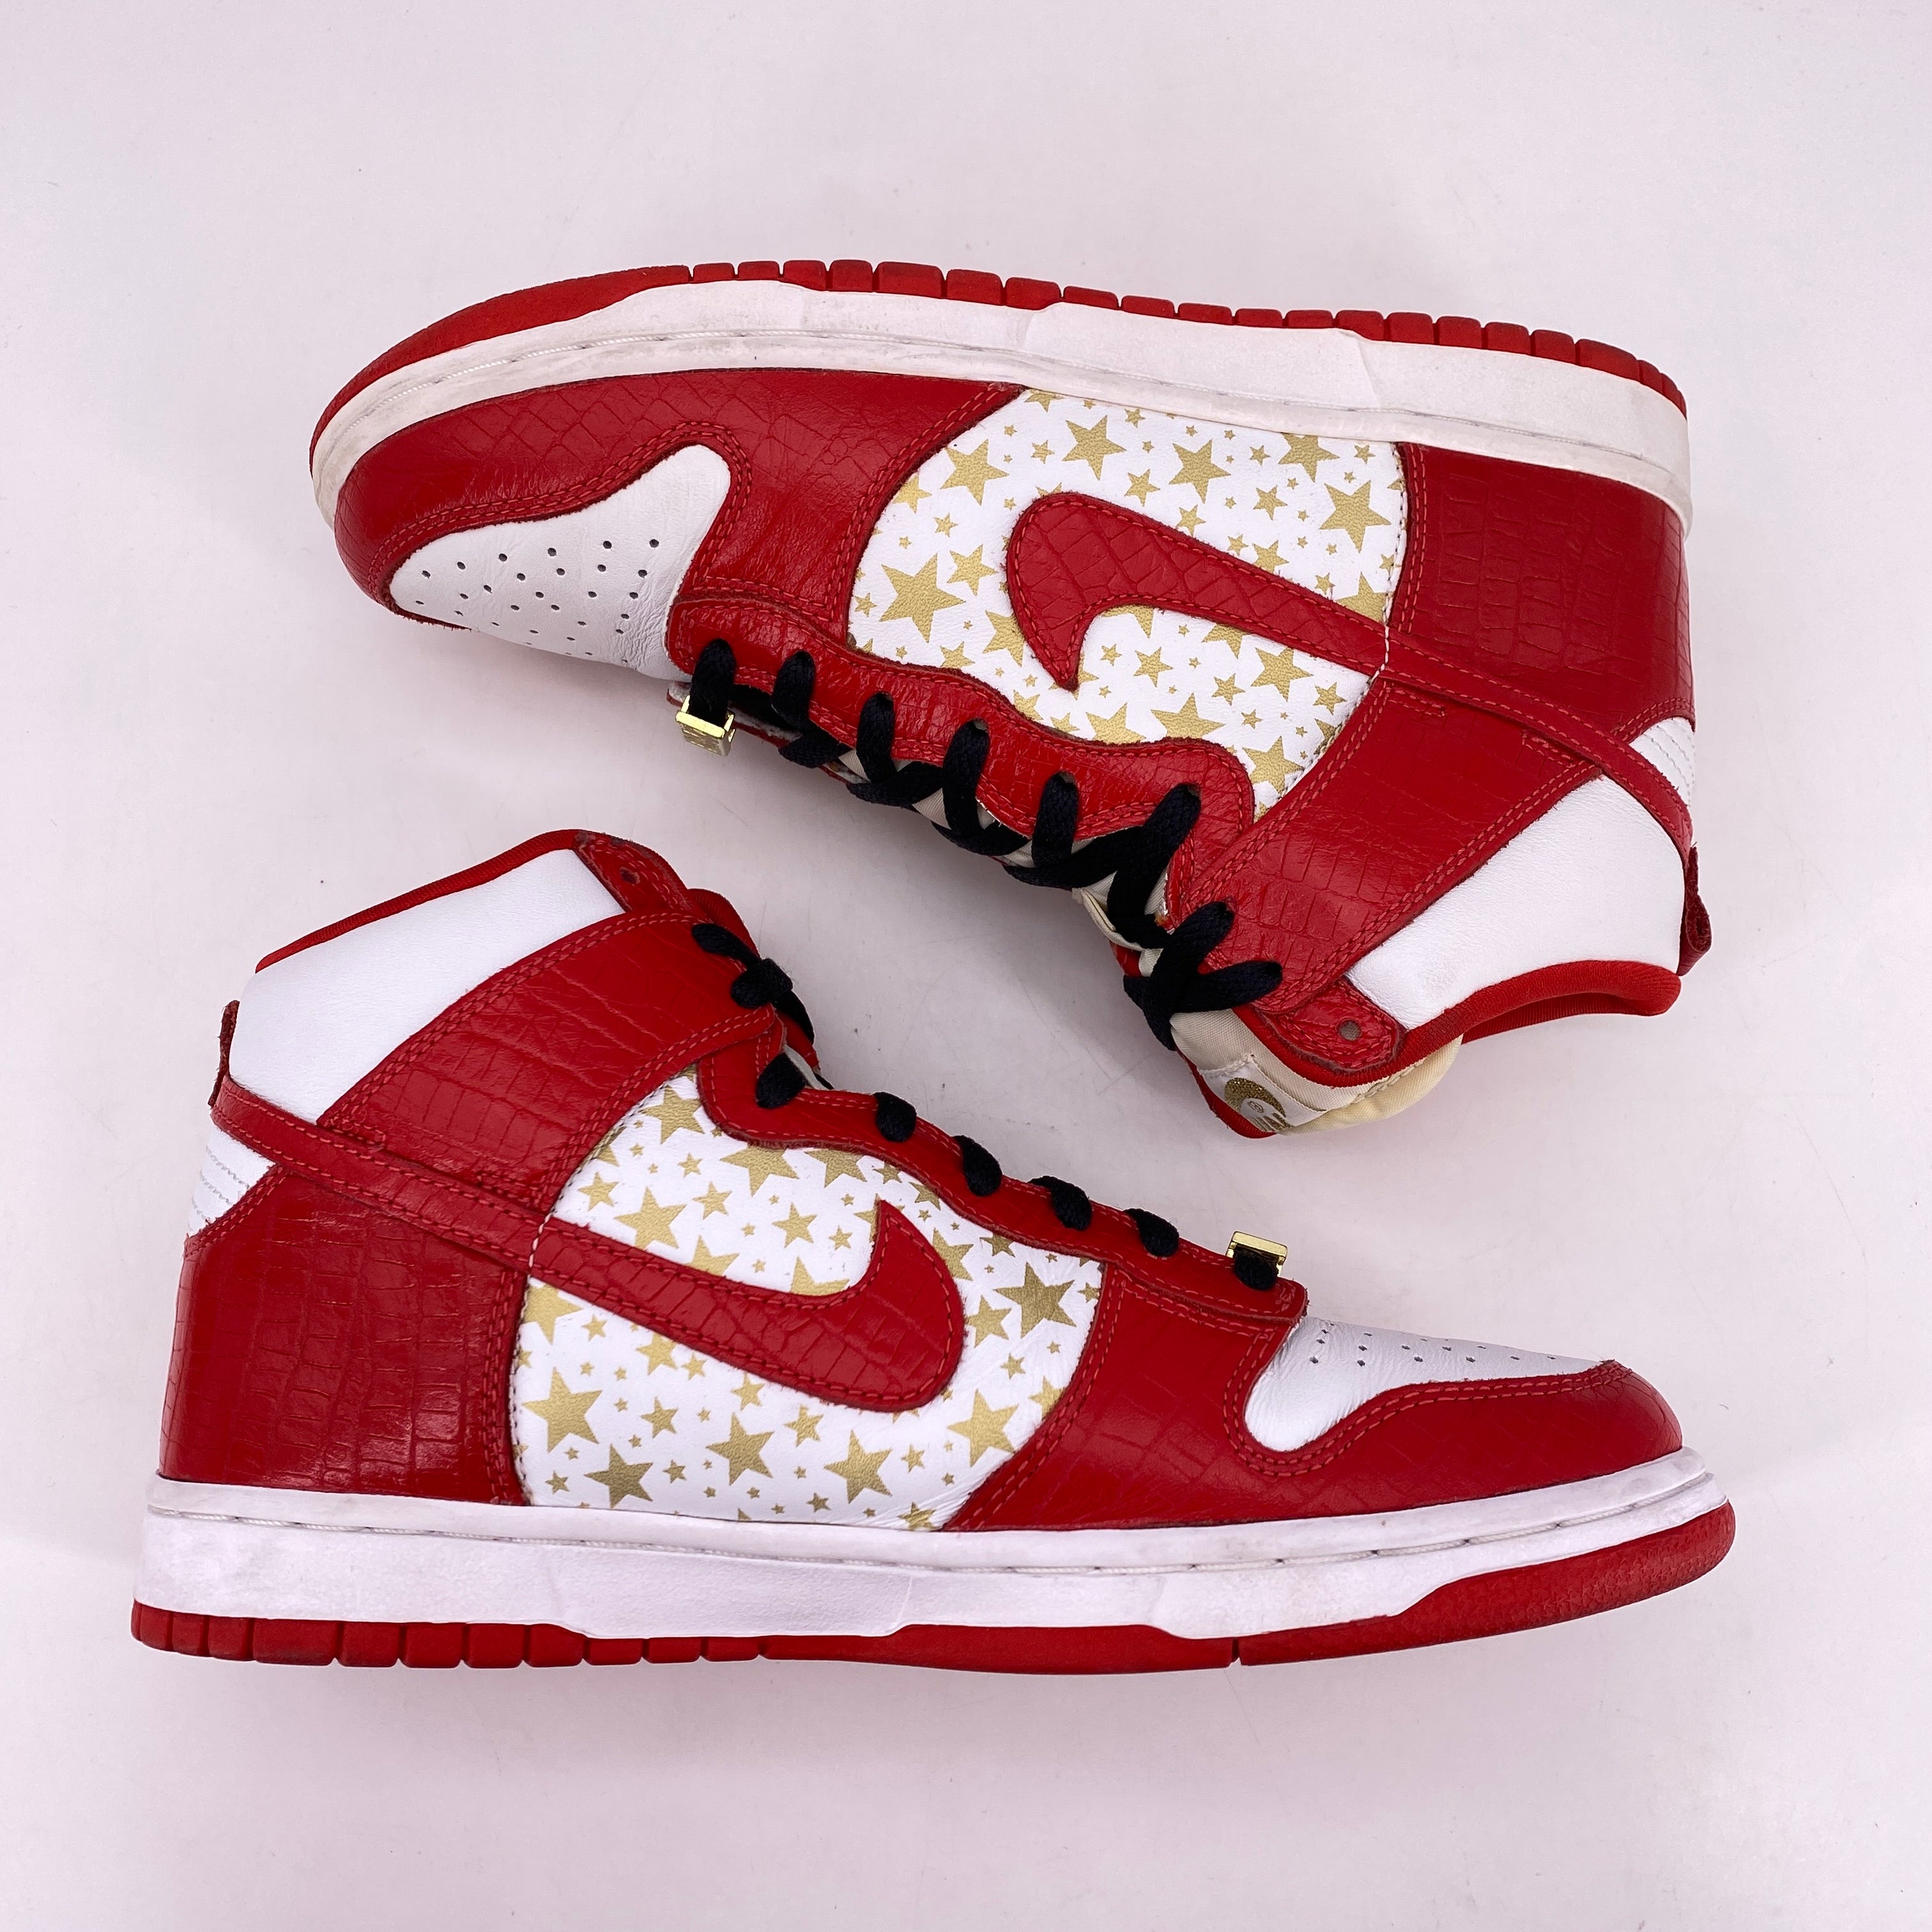 Nike SB Dunk High &quot;SUPREME RED&quot; 2003 Used Size 9